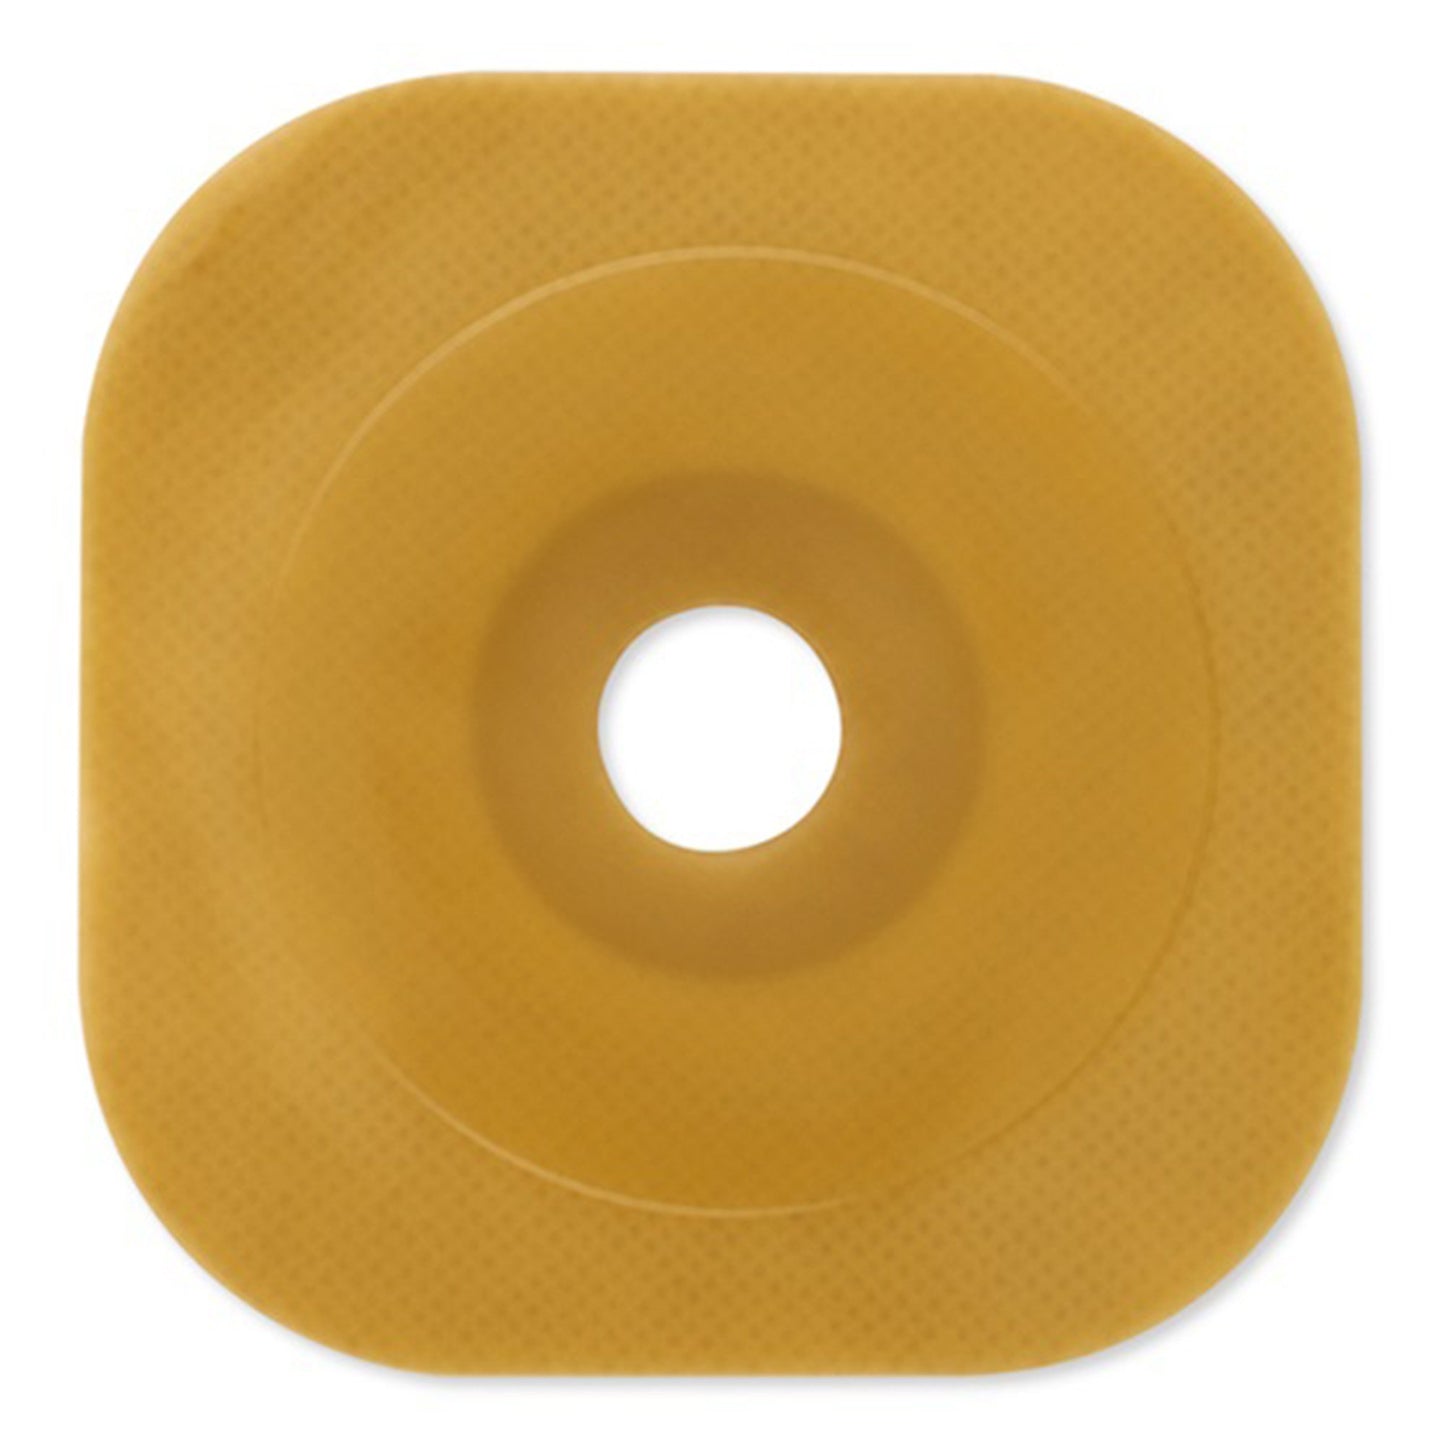 New Image™ FlexWear™ Colostomy Barrier With 1.25 Inch Stoma Opening, 5 ct